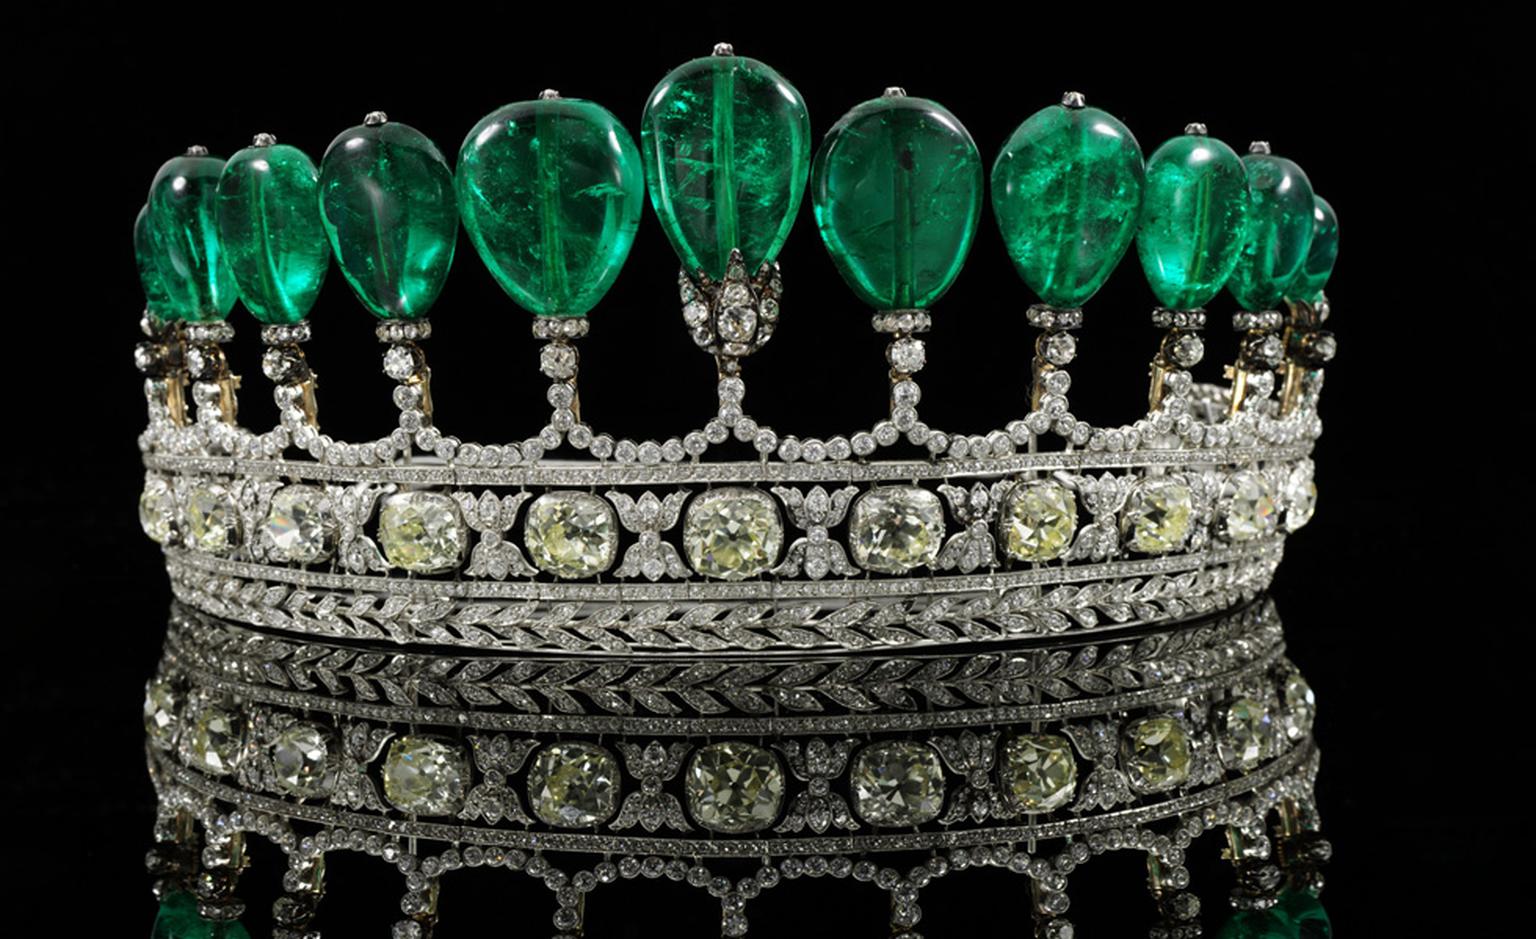 Emerald tiara circa 1900 to be auctioned by Sotheby's in Geneva on 17 May, from the collection of Princess Katharina Henckel von Donnersmarck.